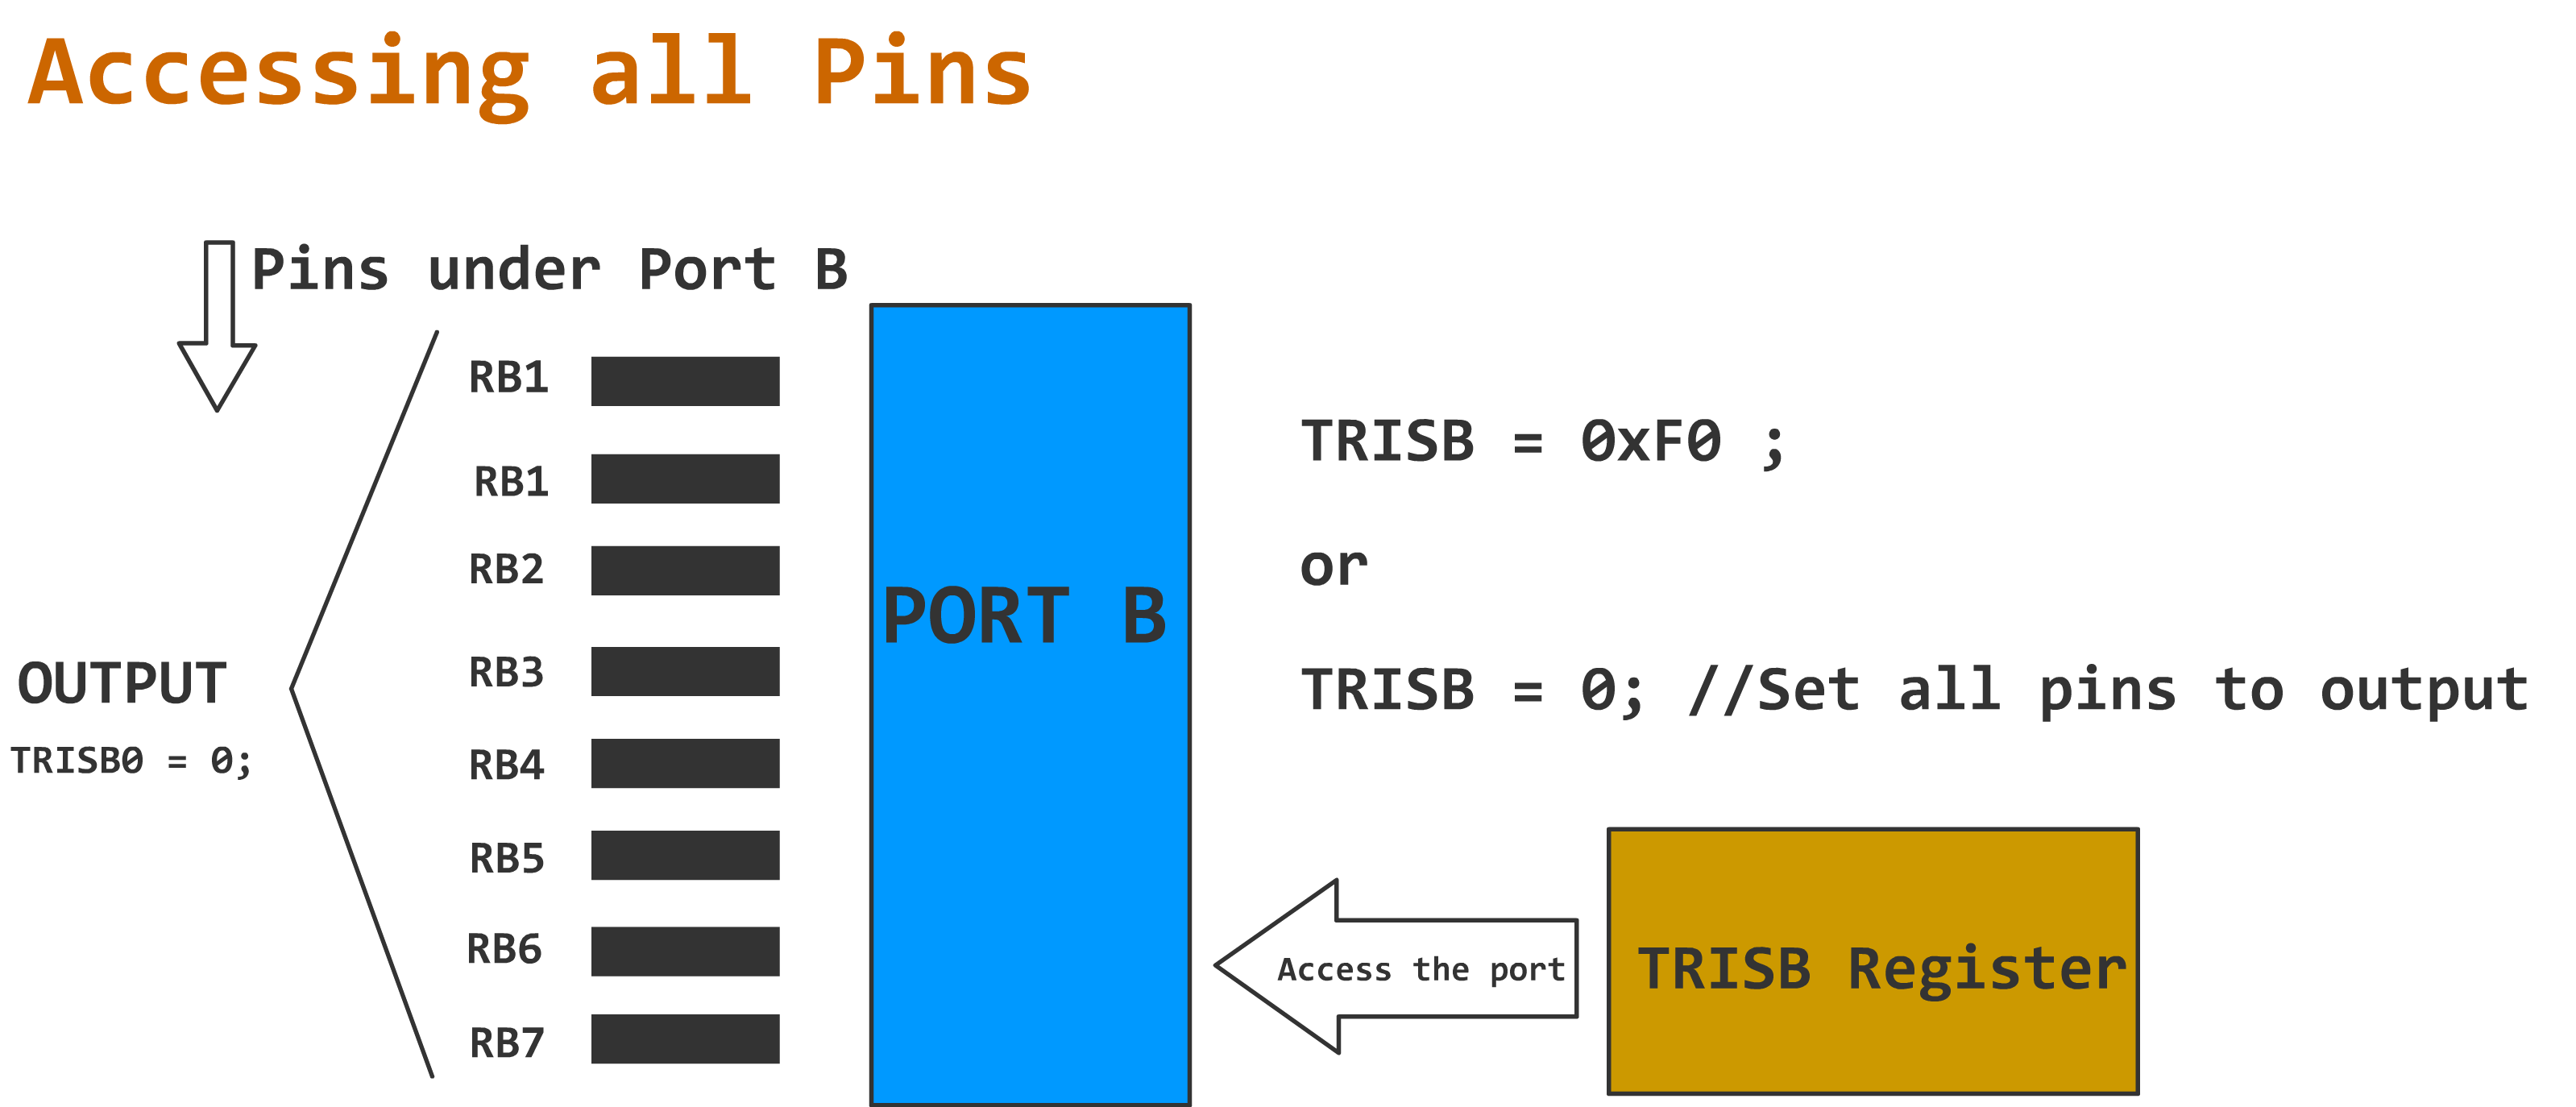 TRISB port settings for accessing all the pins in a PIC18F4550, TRISB = 0; 